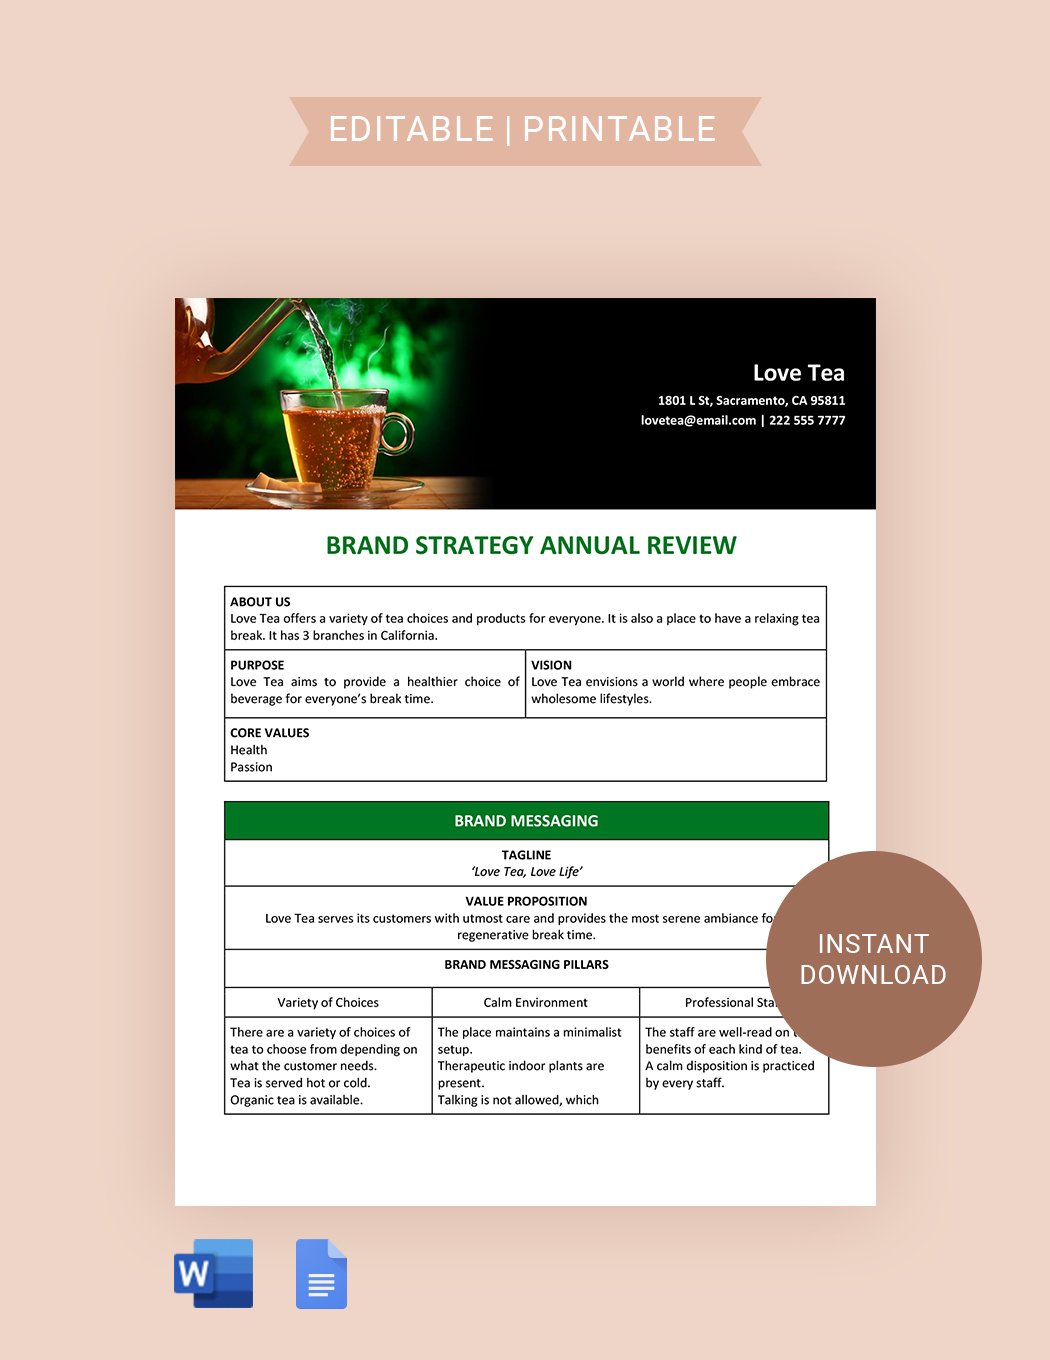 Brand Strategy Annual Review Template in Word, Google Docs